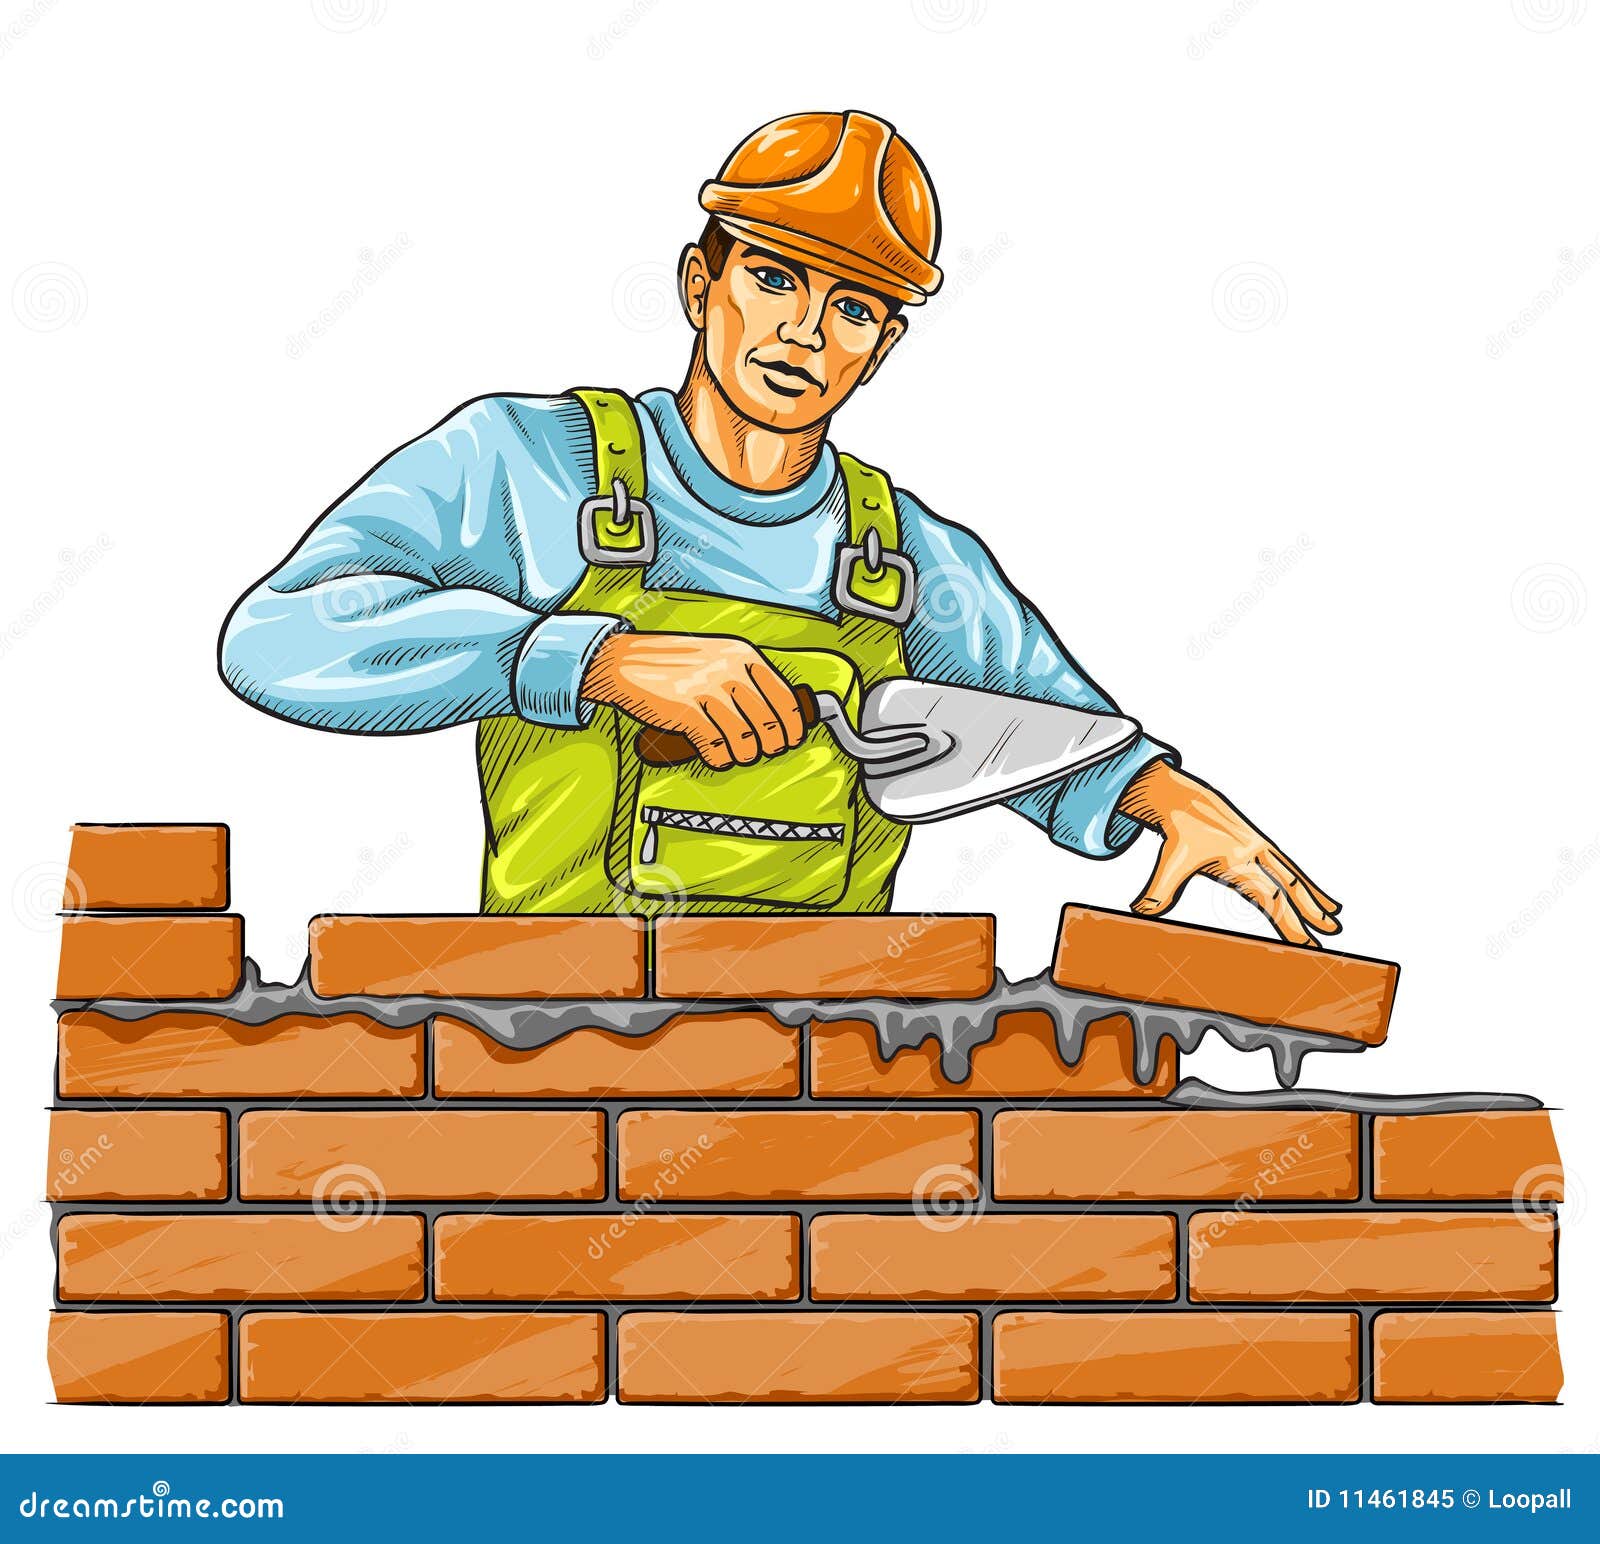 free clipart building tools - photo #25